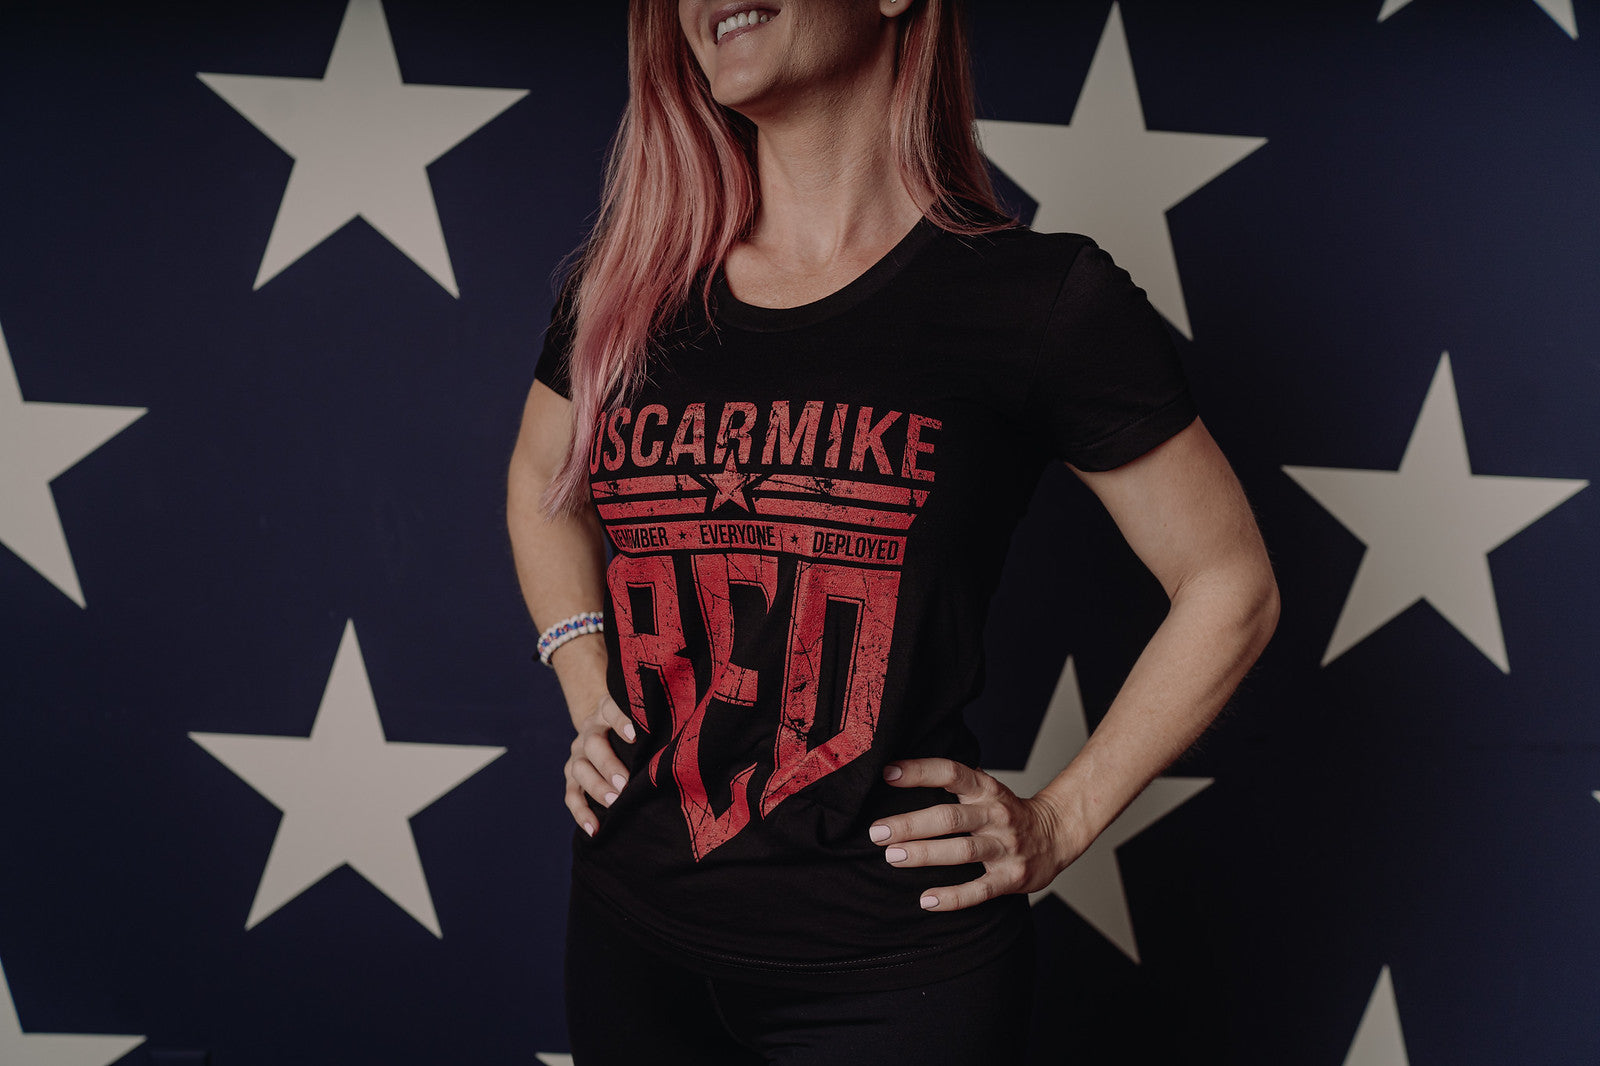 Oscar Mike veteran owned womens American made military and patriotic themed apparel